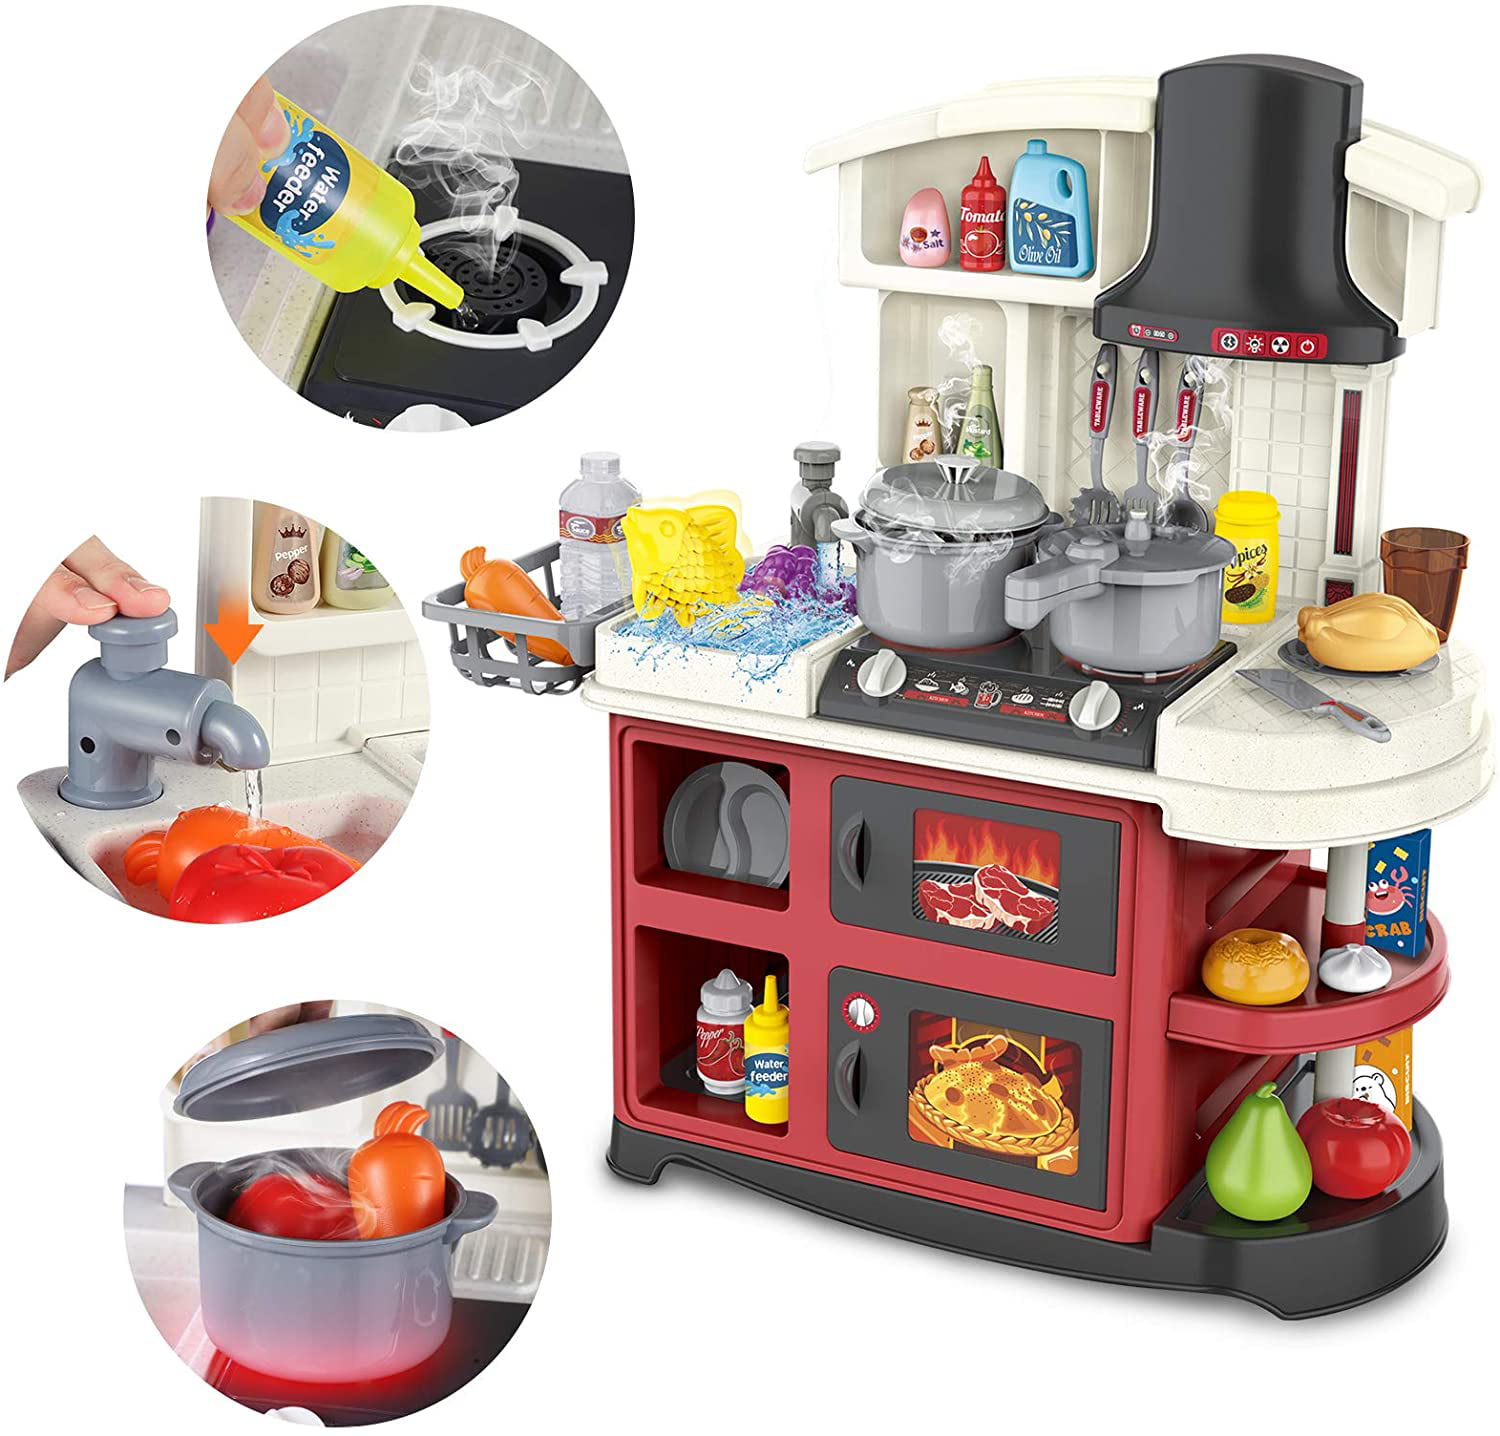 CHILDS ELECTRONIC BBQ KITCHEN COOKING COOKERY SET TOY WITH LIGHTS & SOUNDS